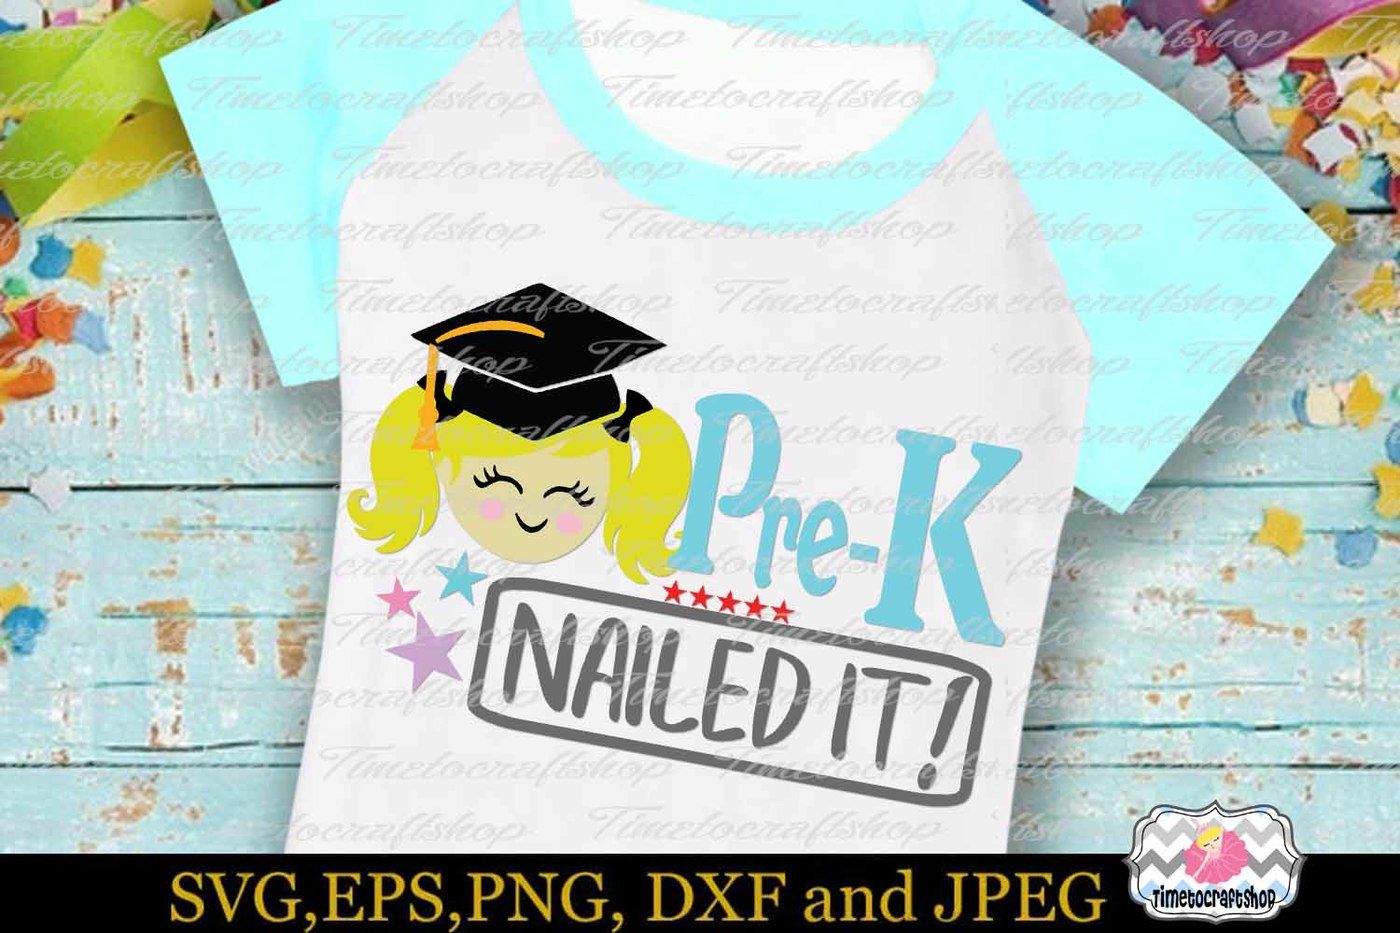 Download SVG, Dxf, Eps & Png Cutting Files Graduation Pre-K Nailed it By Timetocraftshop | TheHungryJPEG.com